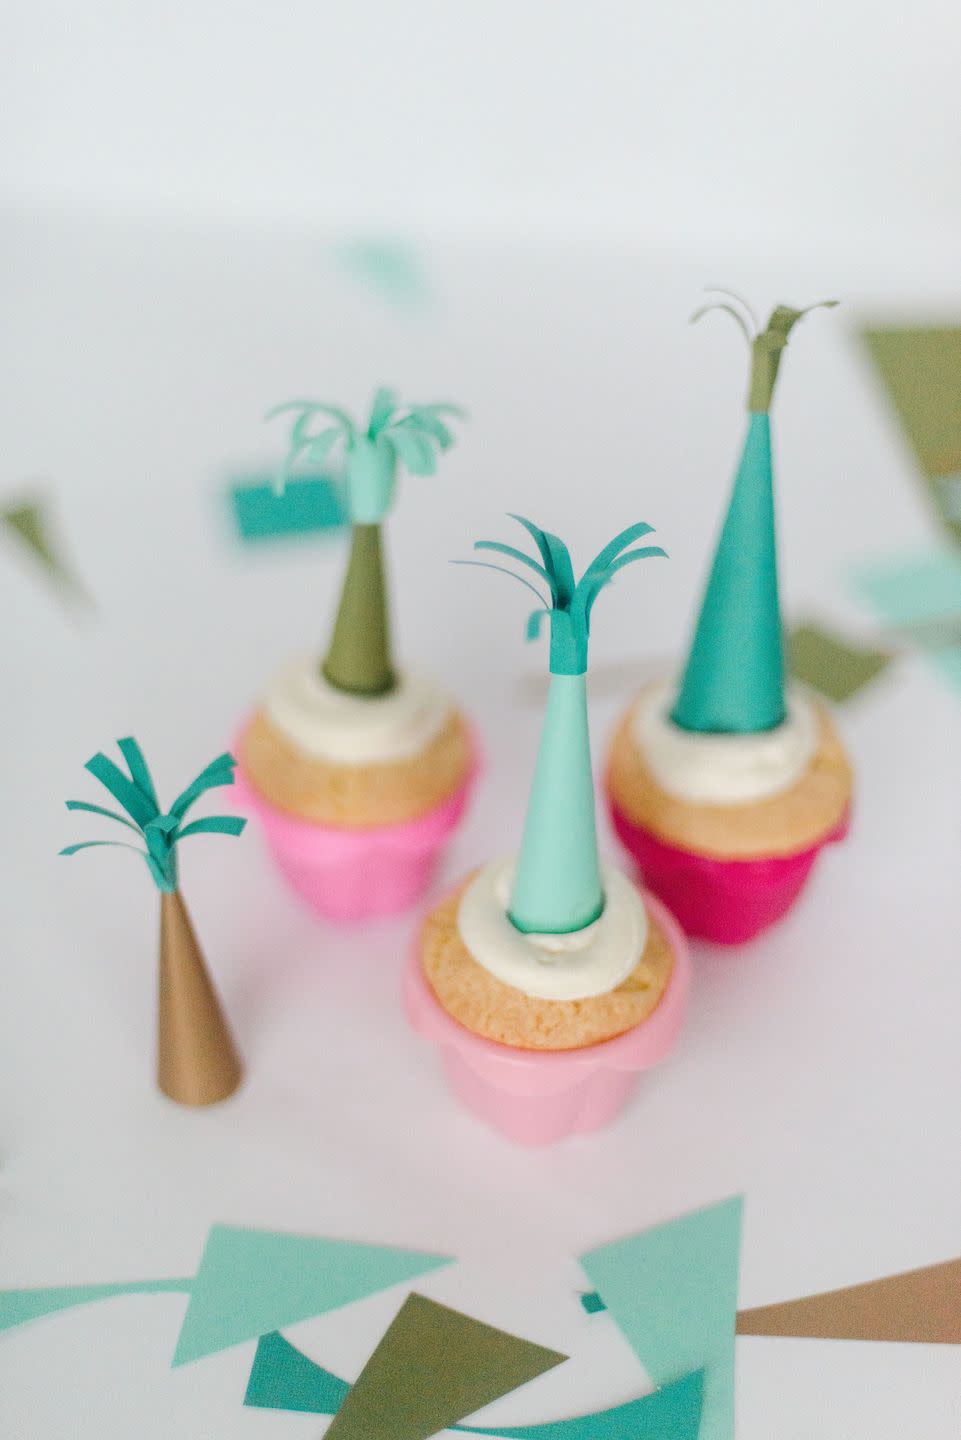 cute party hats for cupcakes are a great baby shower idea